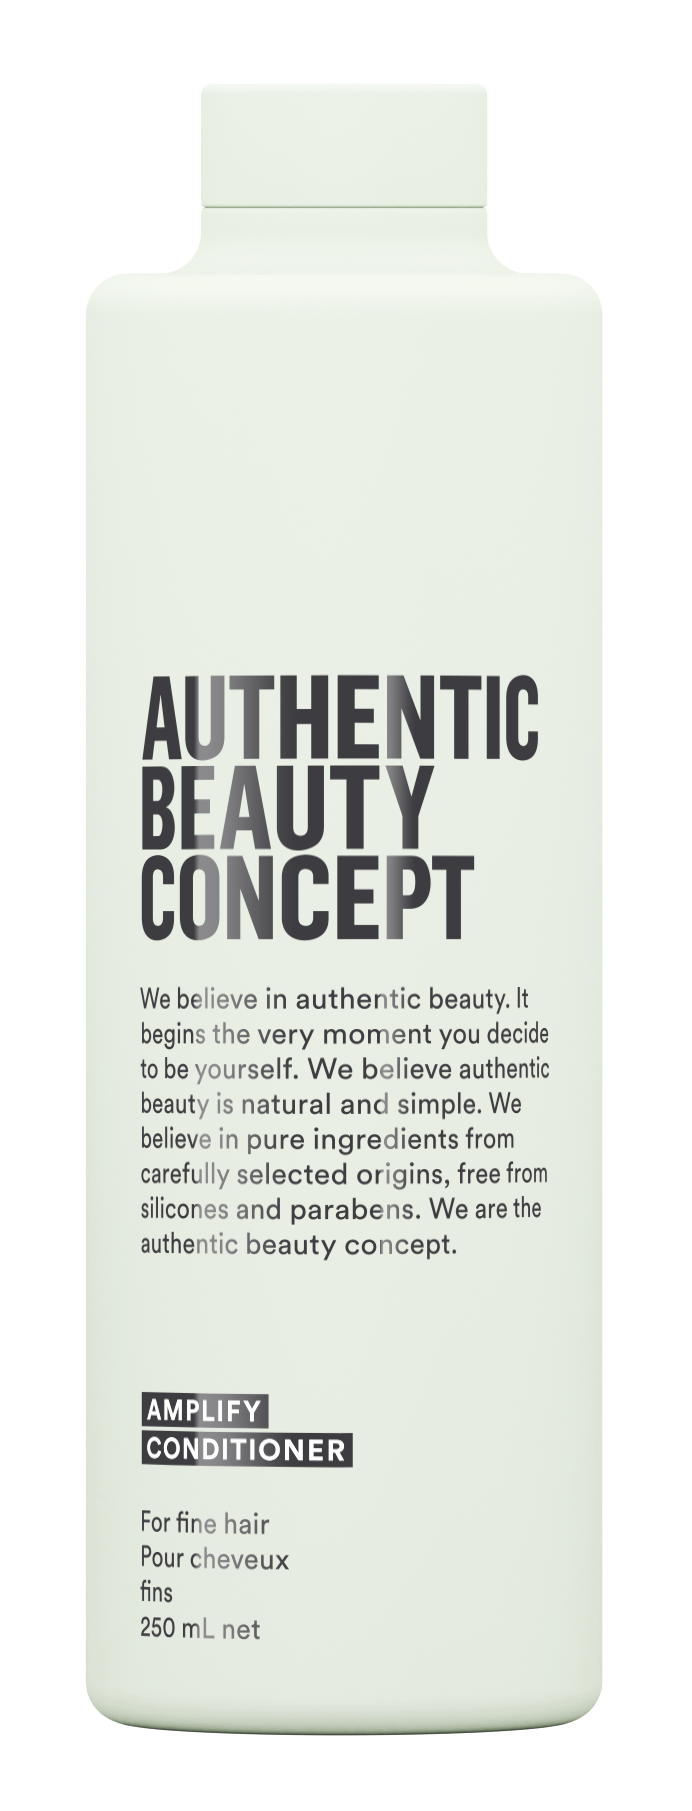 Eds Hair - Authentic Beauty Concept - Amplify Conditioner